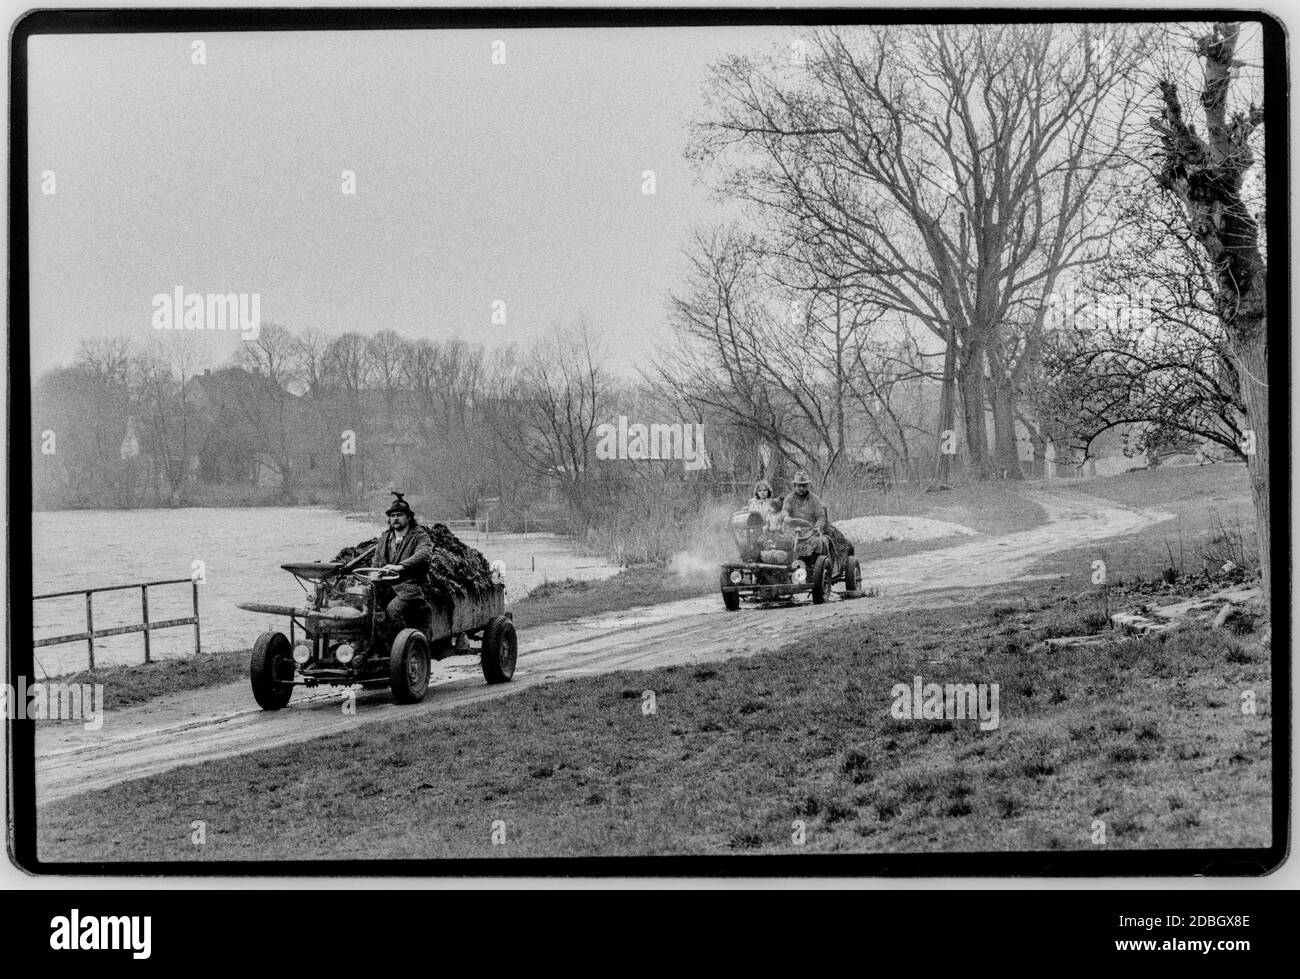 East Germany 1990 scanned in 2020 Home made transport at Gartz now in Brandenburg on the River Oder showing the bridge destroyed in WW2. Poland is on theopposite river bank. East Germany, Deutsche Demokratische Republik the DDR after the fall of the Wall but before reunification March 1990 and scanned in 2020.East Germany, officially the German Democratic Republic, was a country that existed from 1949 to 1990, the period when the eastern portion of Germany was part of the Eastern Bloc during the Cold War. Stock Photo